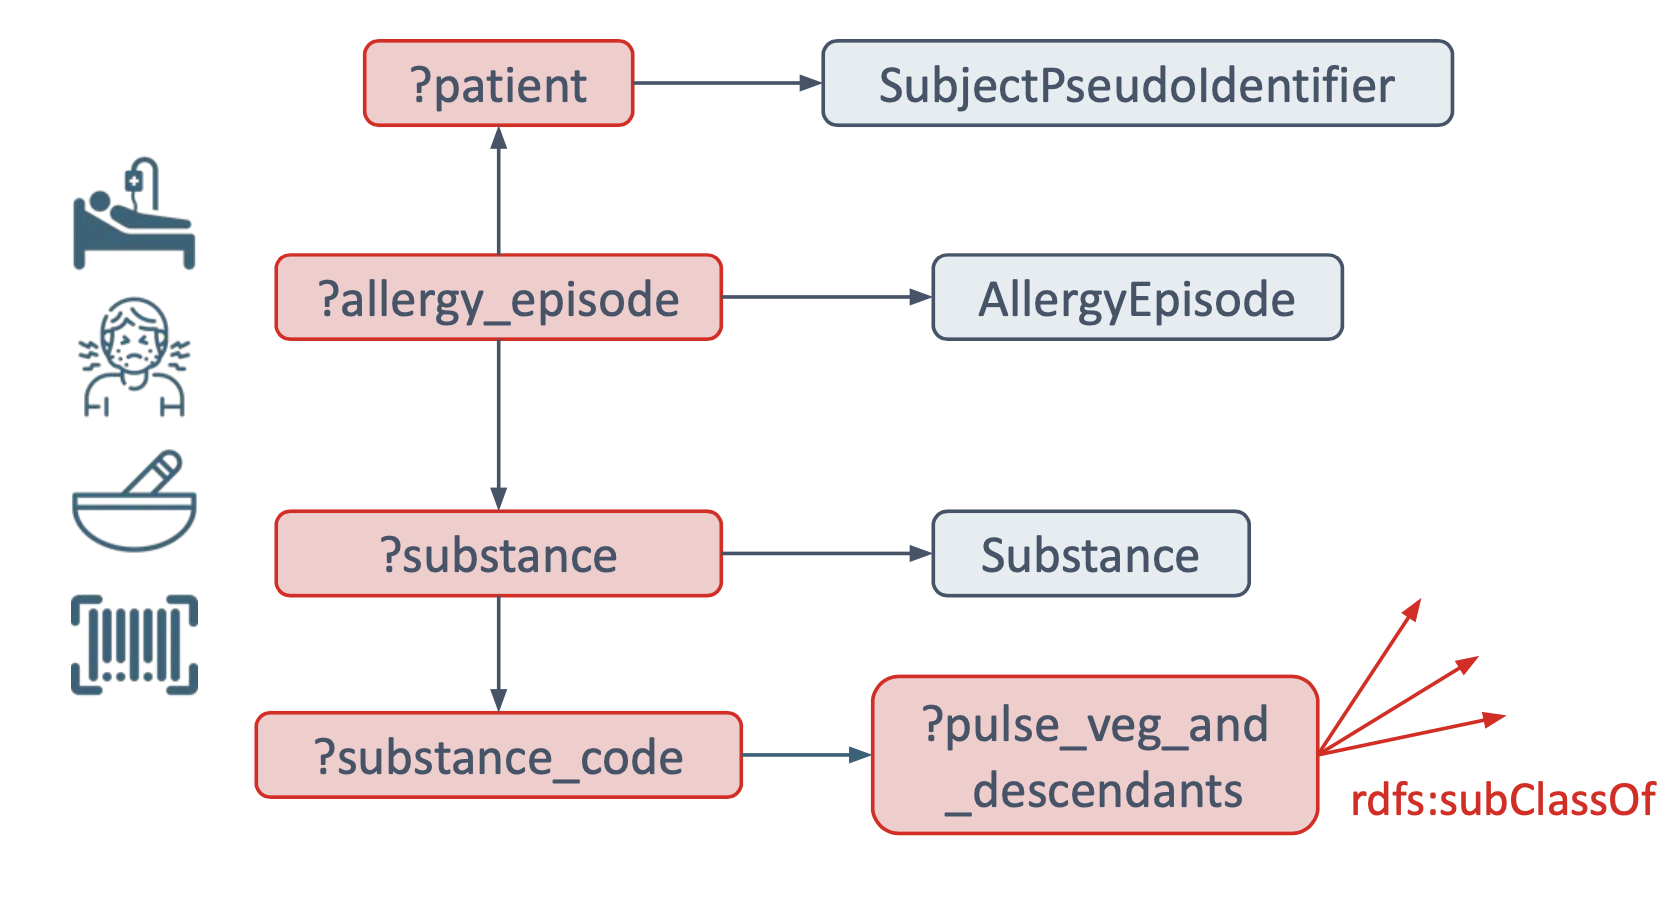 Diagram complementing the SPARQL query for Patients allergic to Pulse Vegetable.